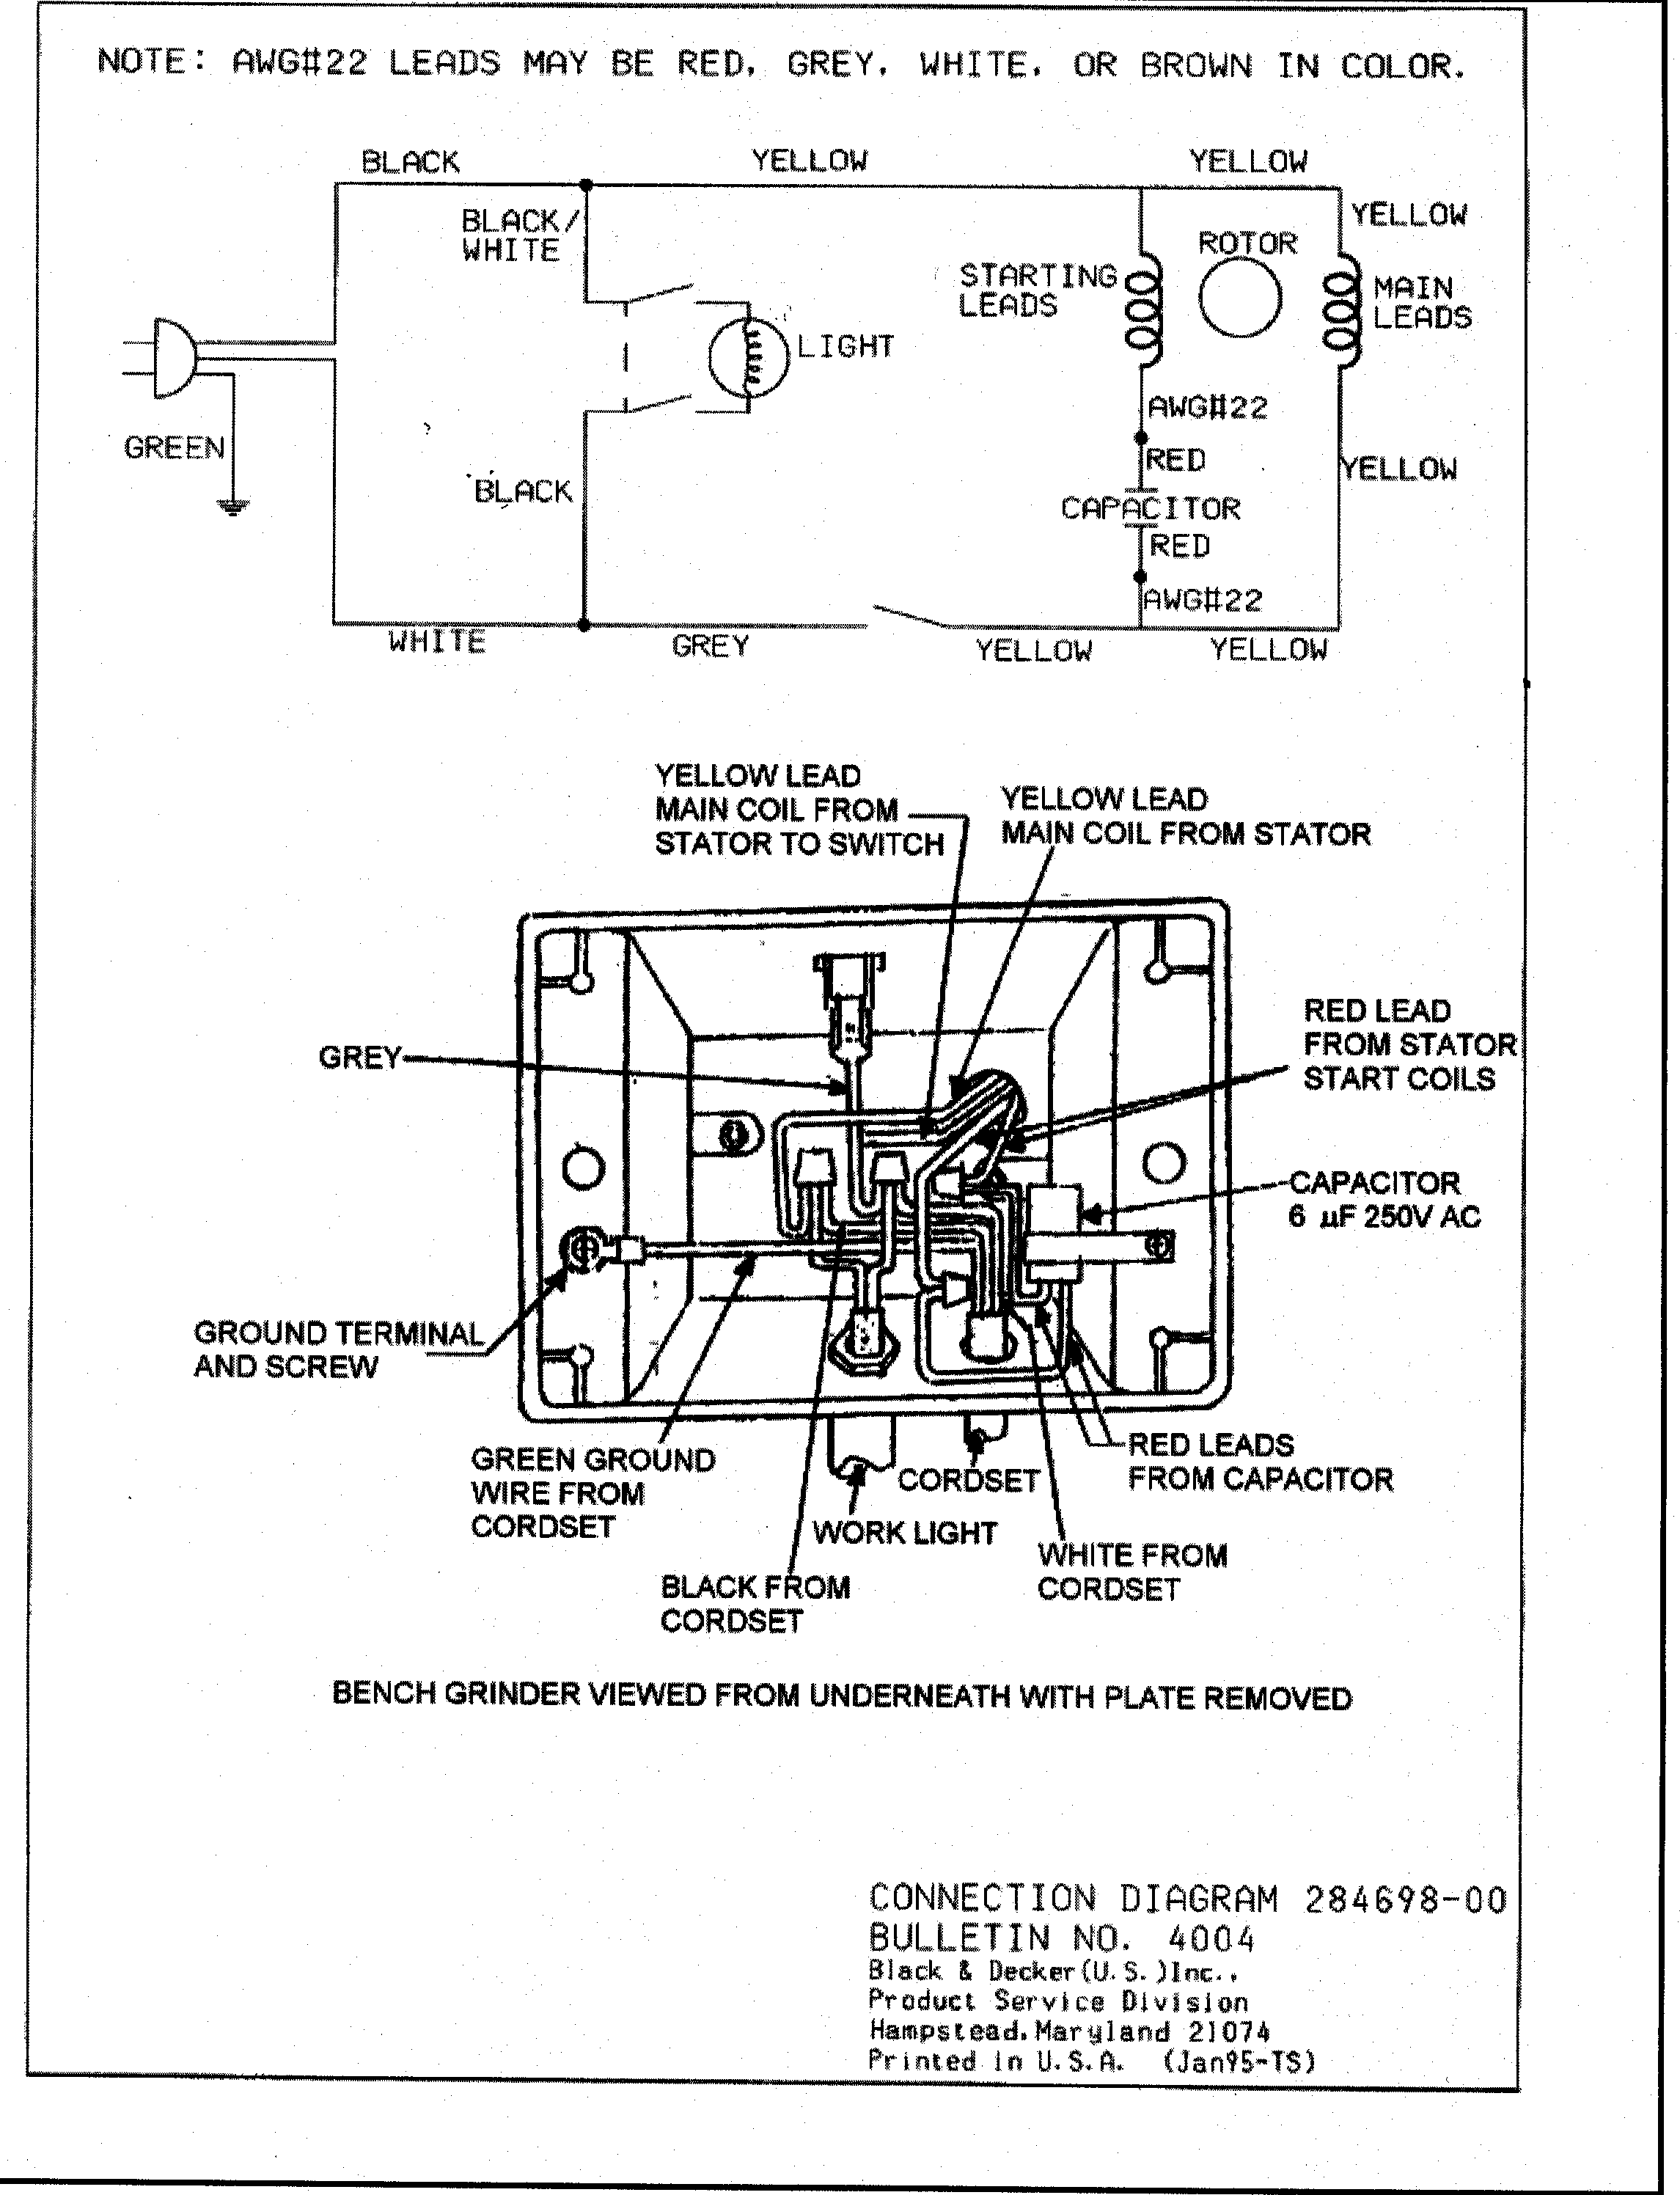 wiring diagram for a capacitor on a wissota model e33 bench grinder